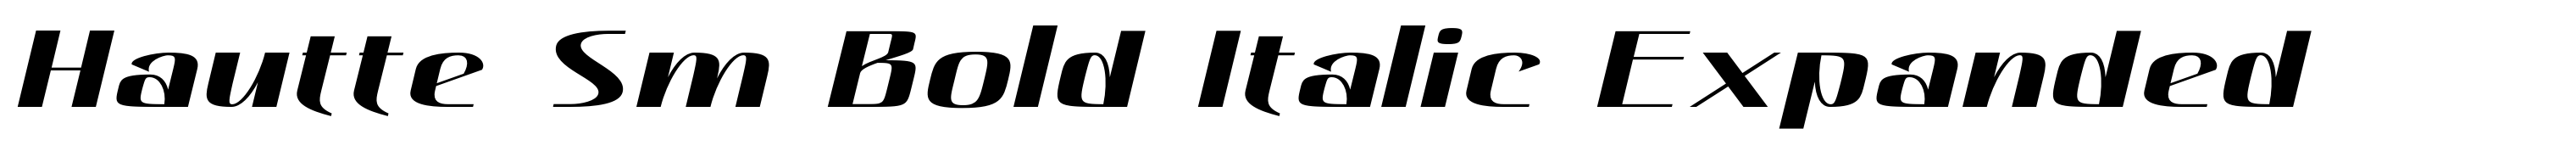 Hautte Sm Bold Italic Expanded